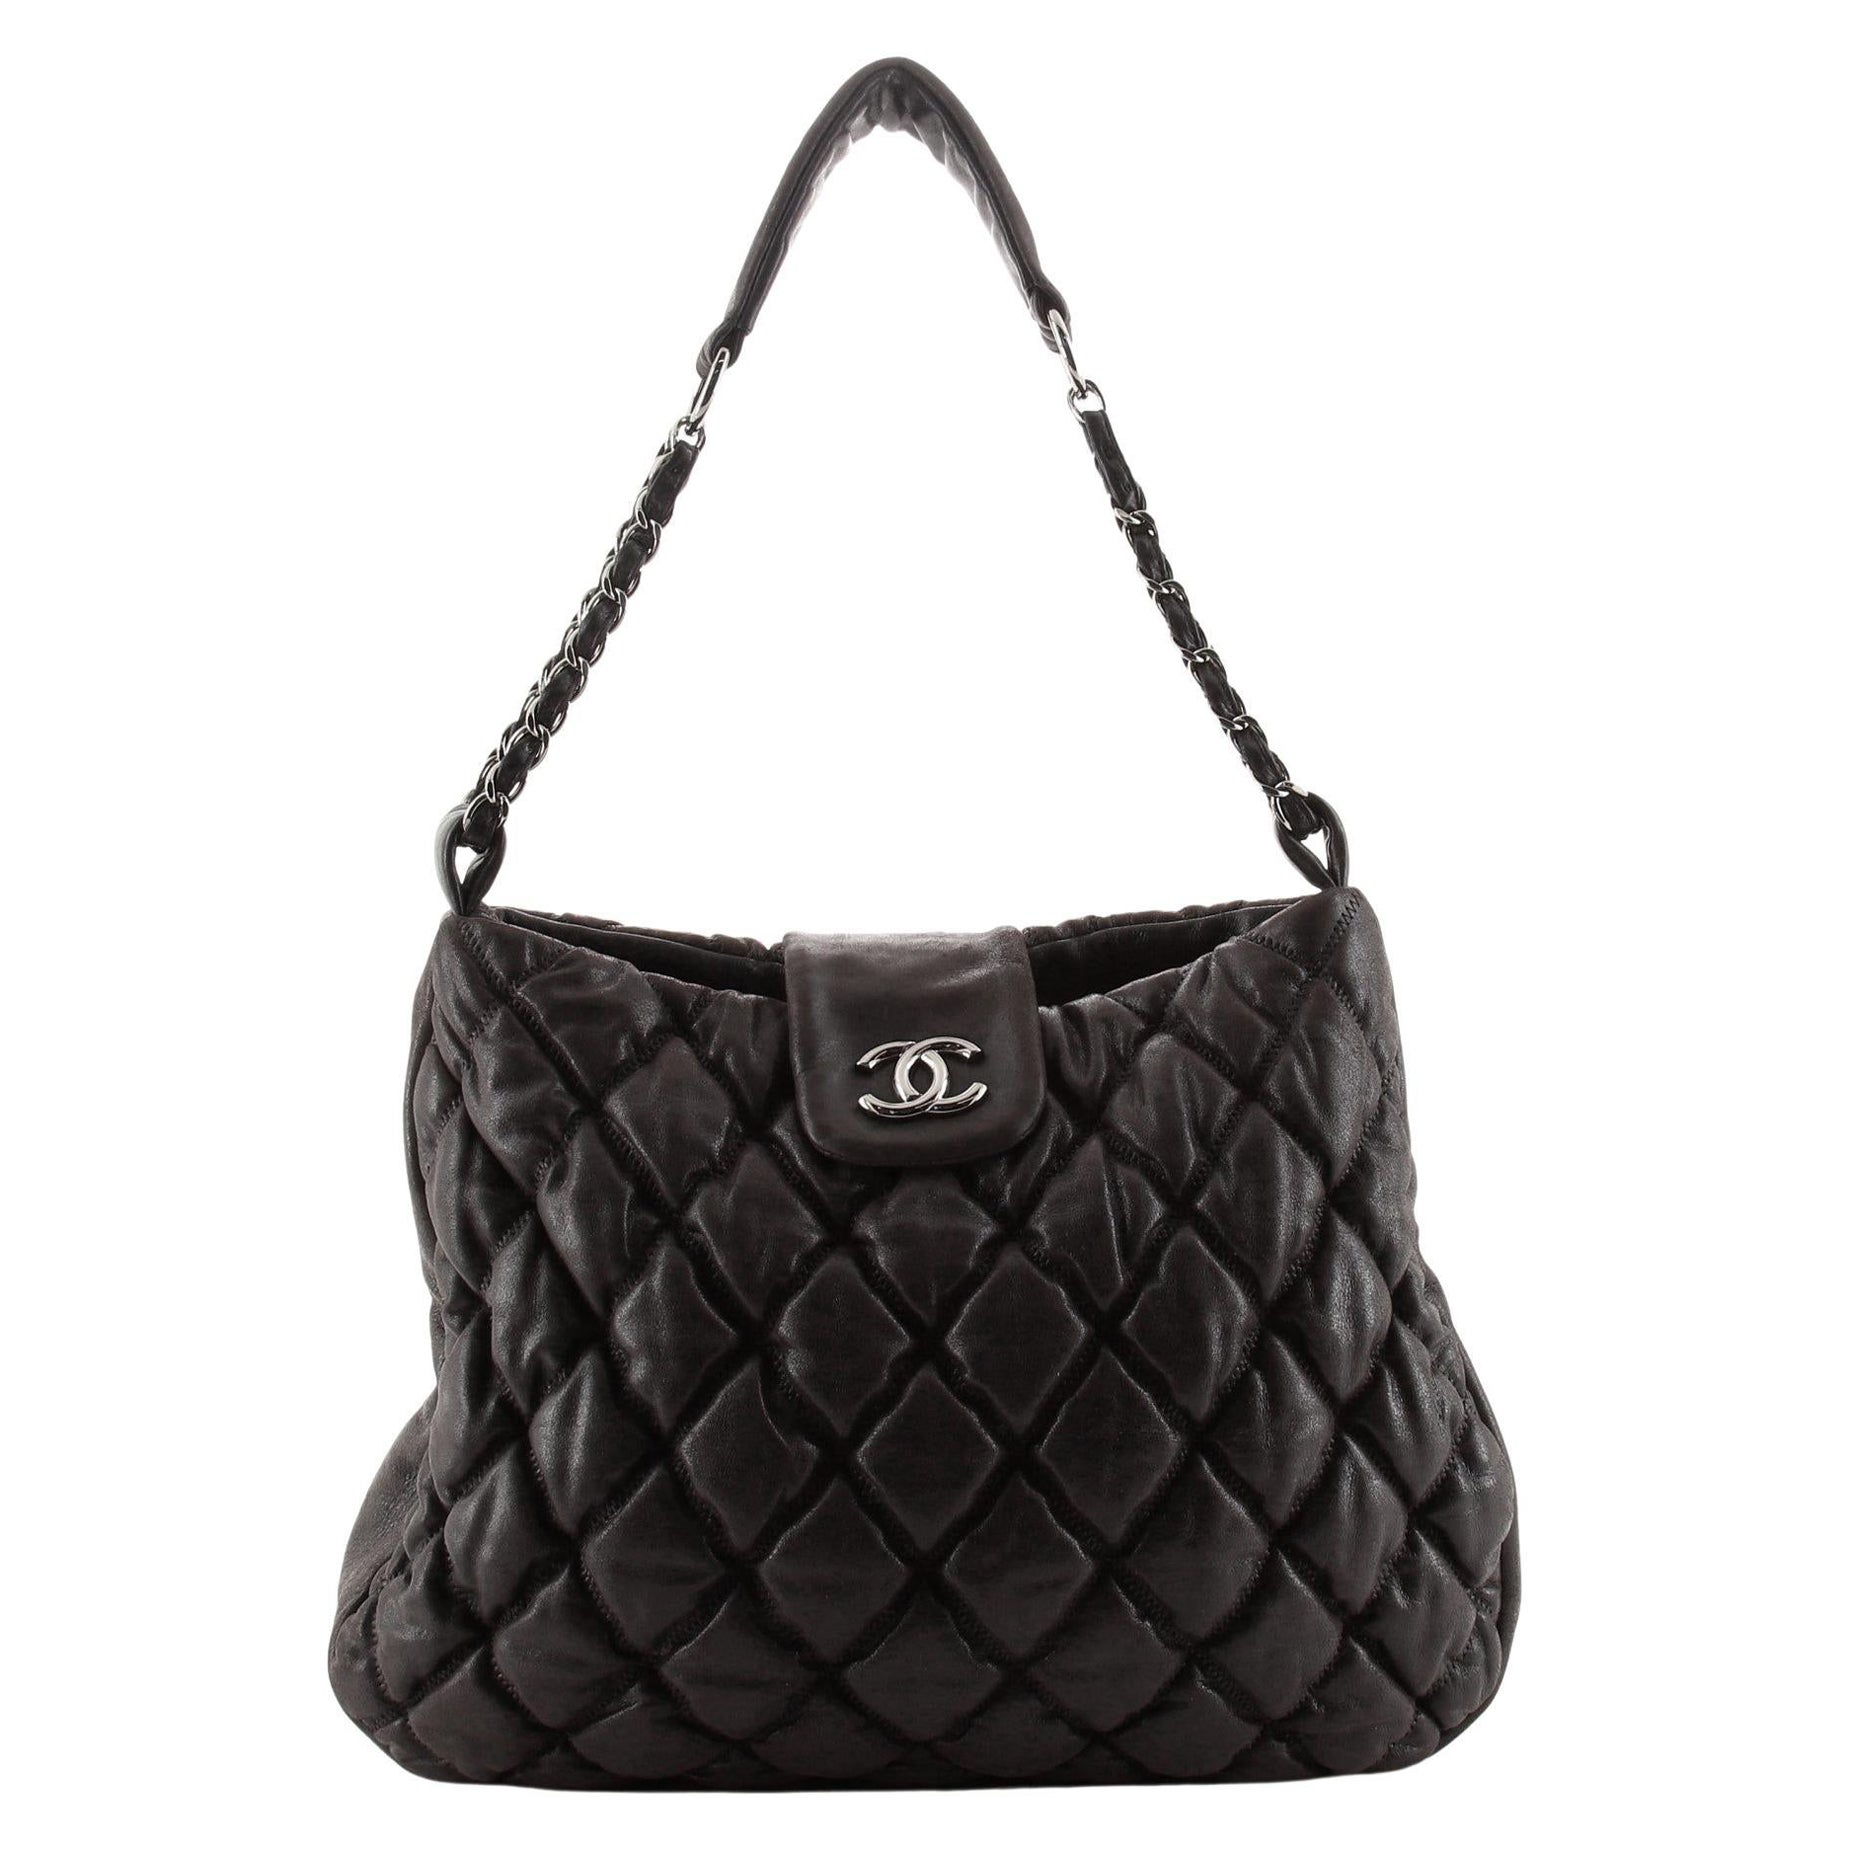 IHKWIP Quilted Flap Convertible Shoulder Bag w/ Chain Strap